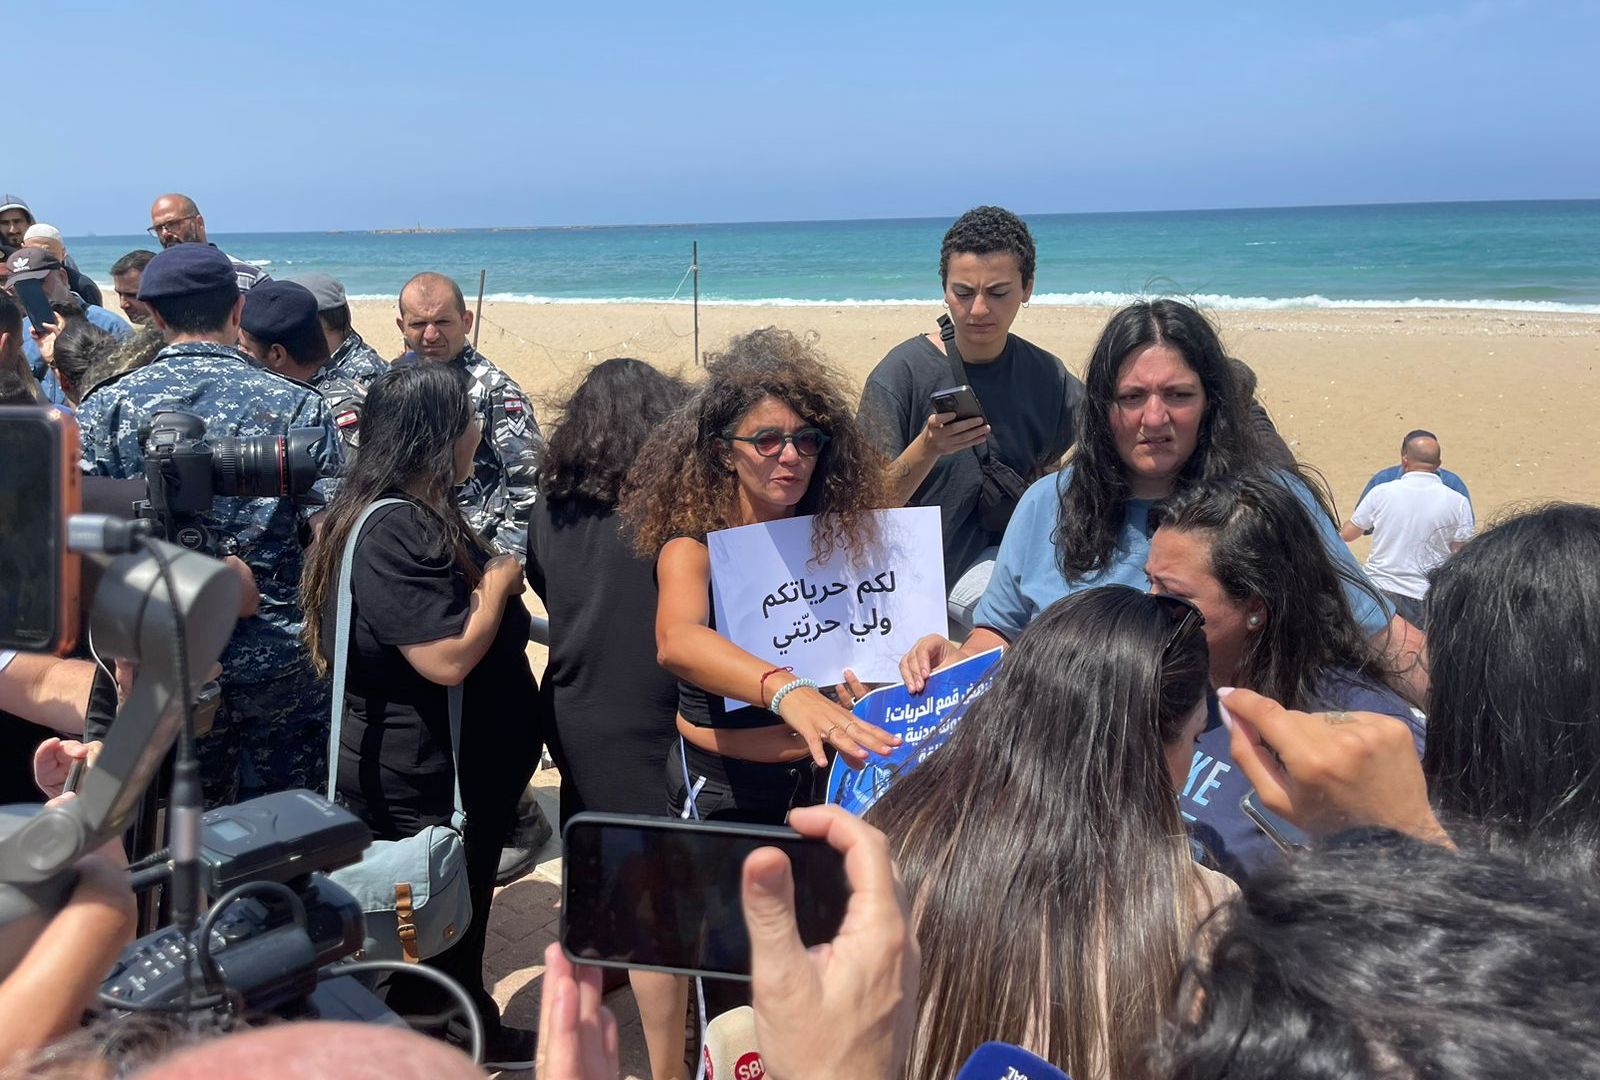 Lebanese feminists protest after woman harassed over swimsuit | Women’s Rights News